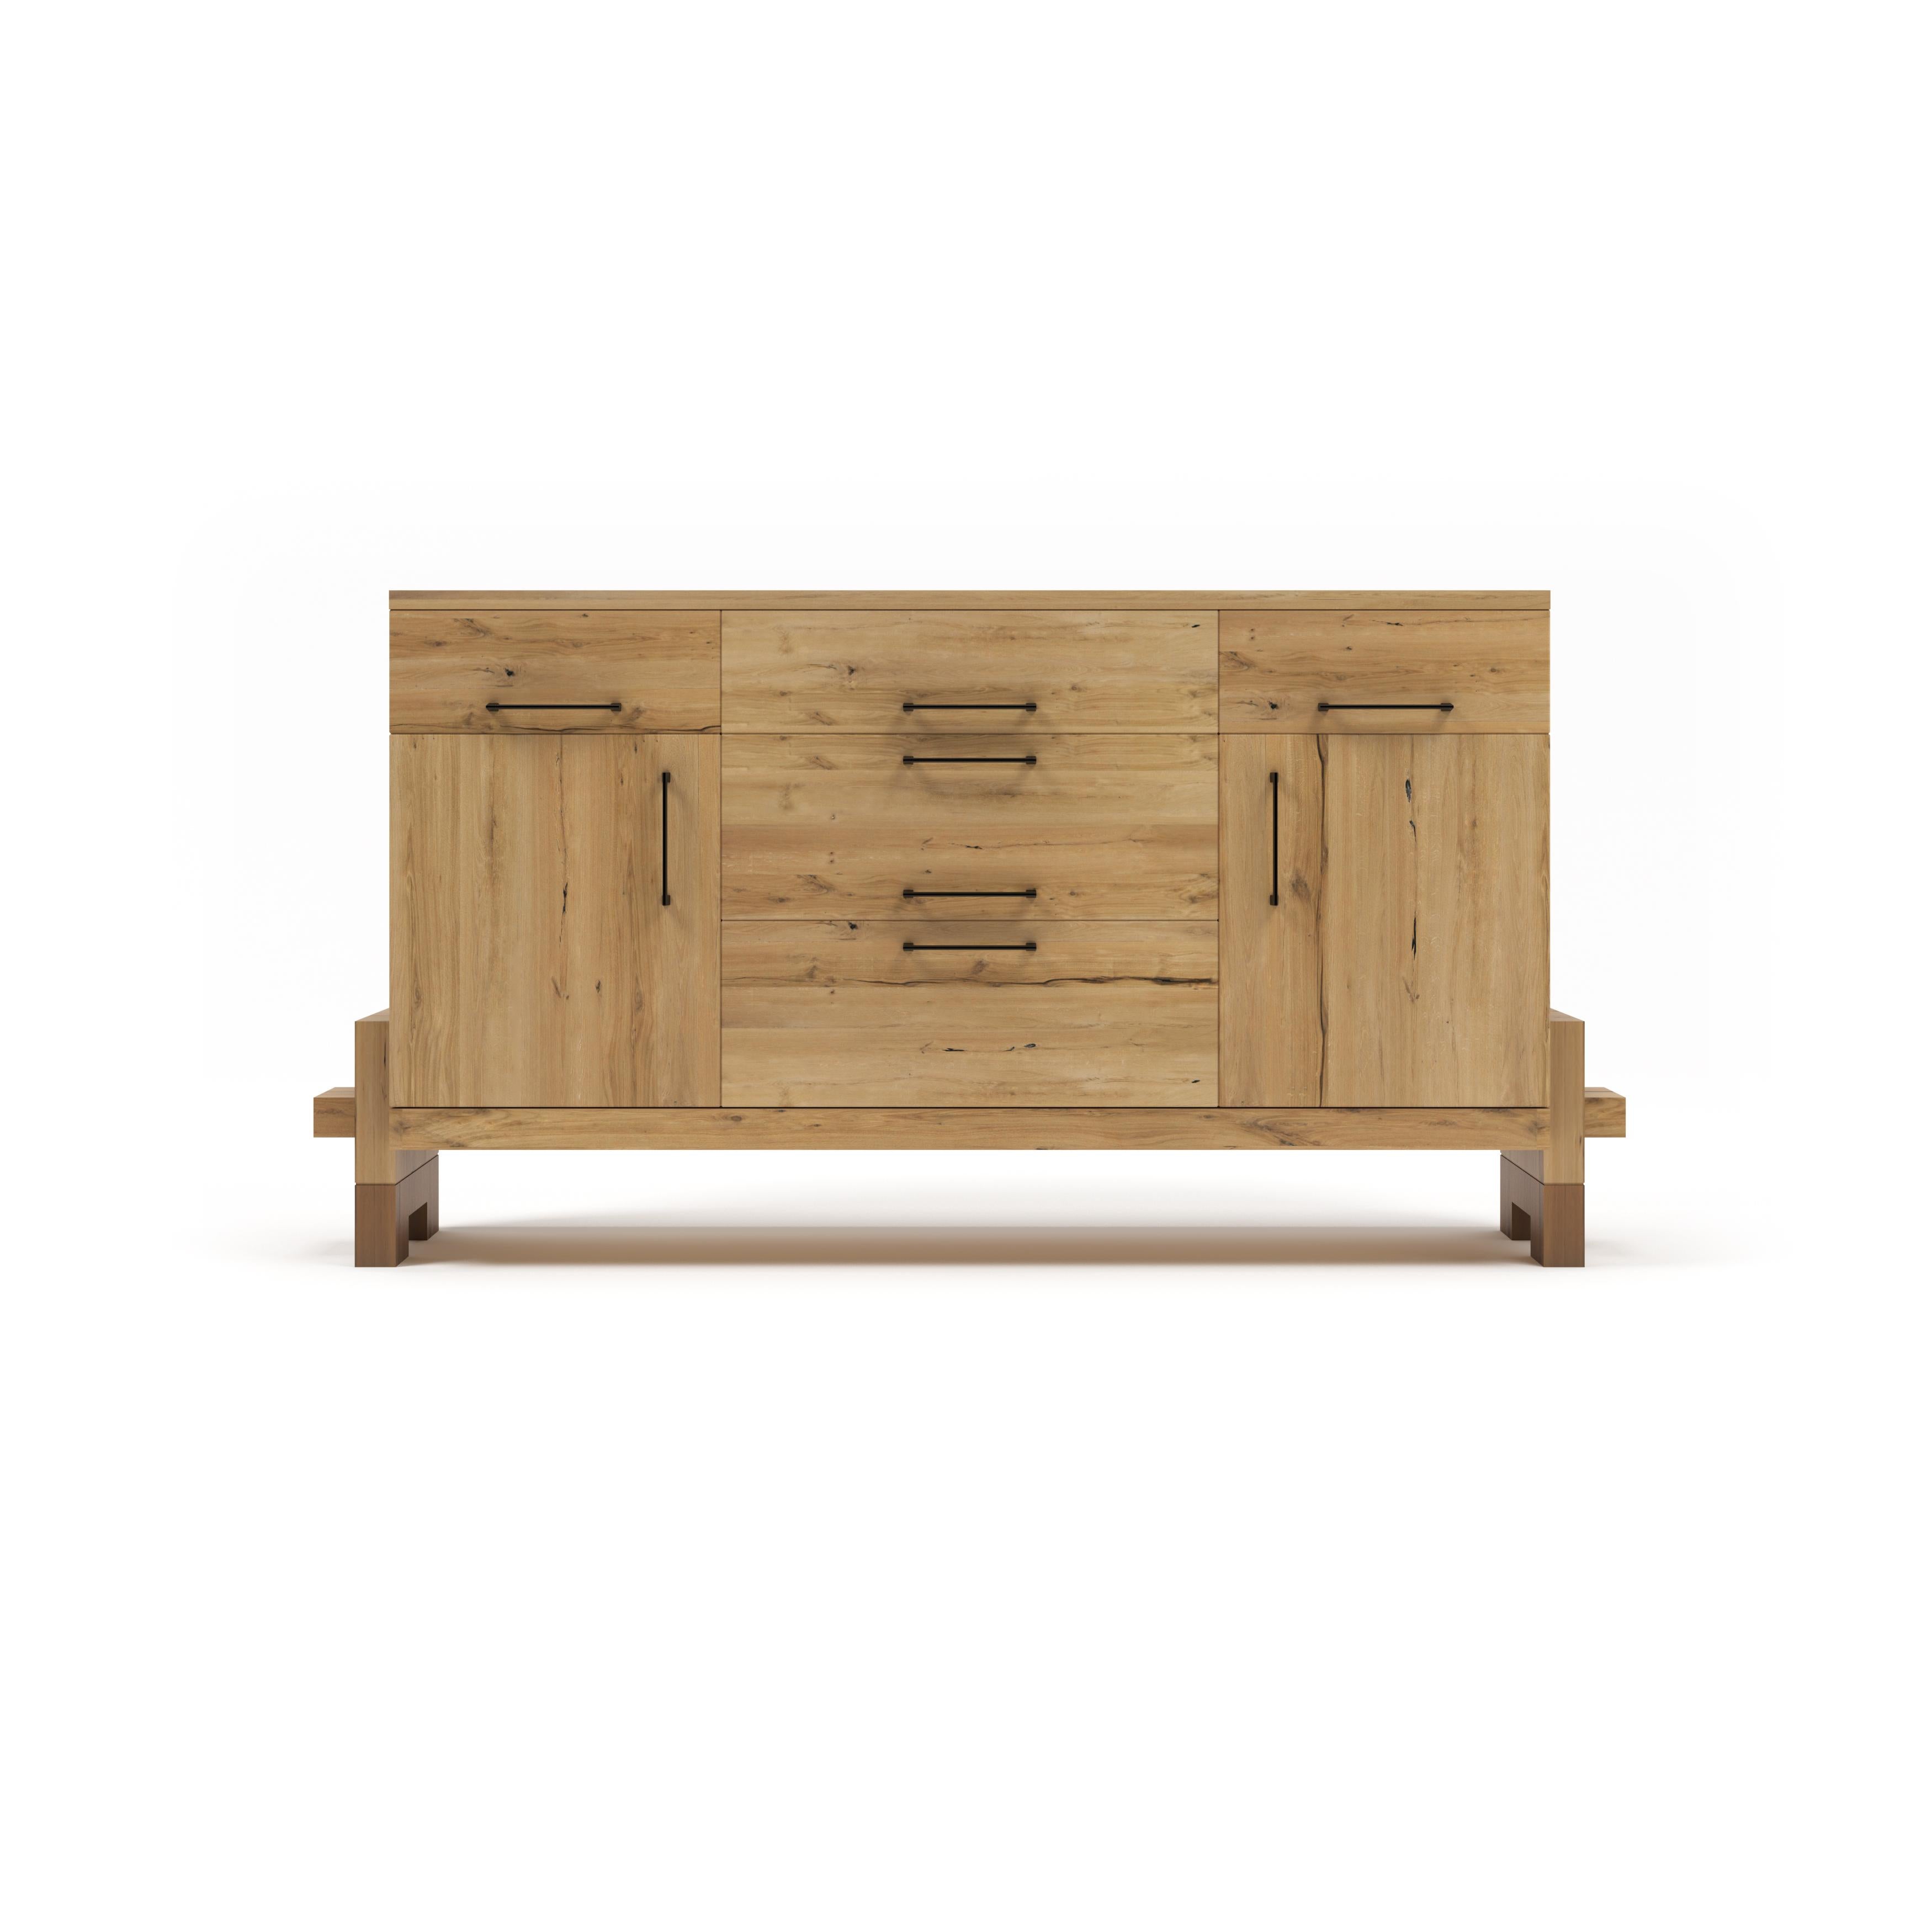 Organize your living space with the Pana-Chest of Drawers. This massive oak chest provides ample storage and showcases the superior craftsmanship of its wood joinery. Experience the beauty and reliability of this chest of drawers for years to come.